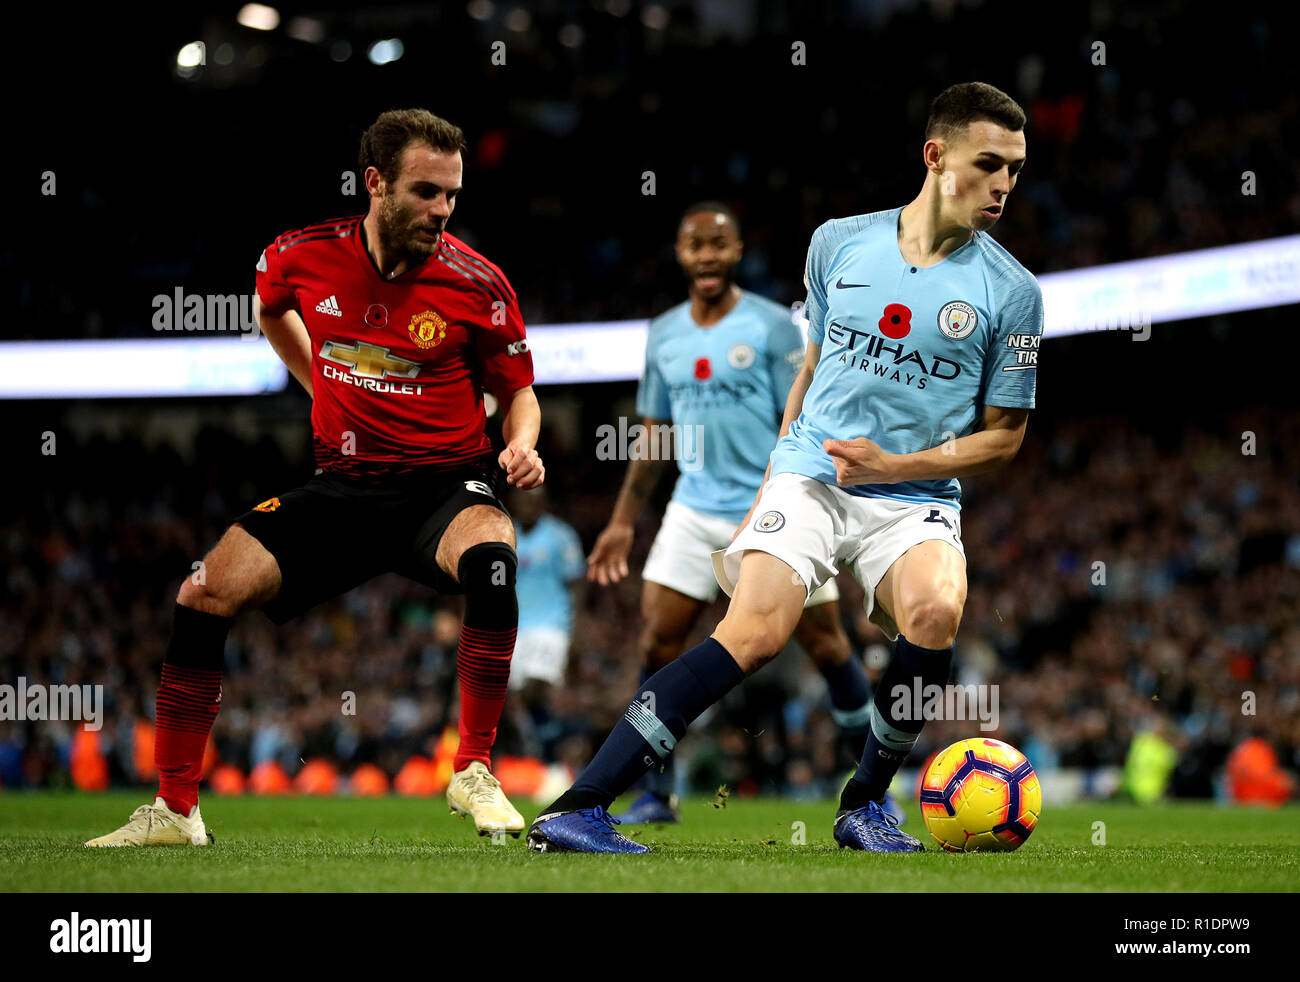 Manchester City's Phil Foden (right) in action during the Premier League match at the Etihad Stadium, Manchester. Stock Photo